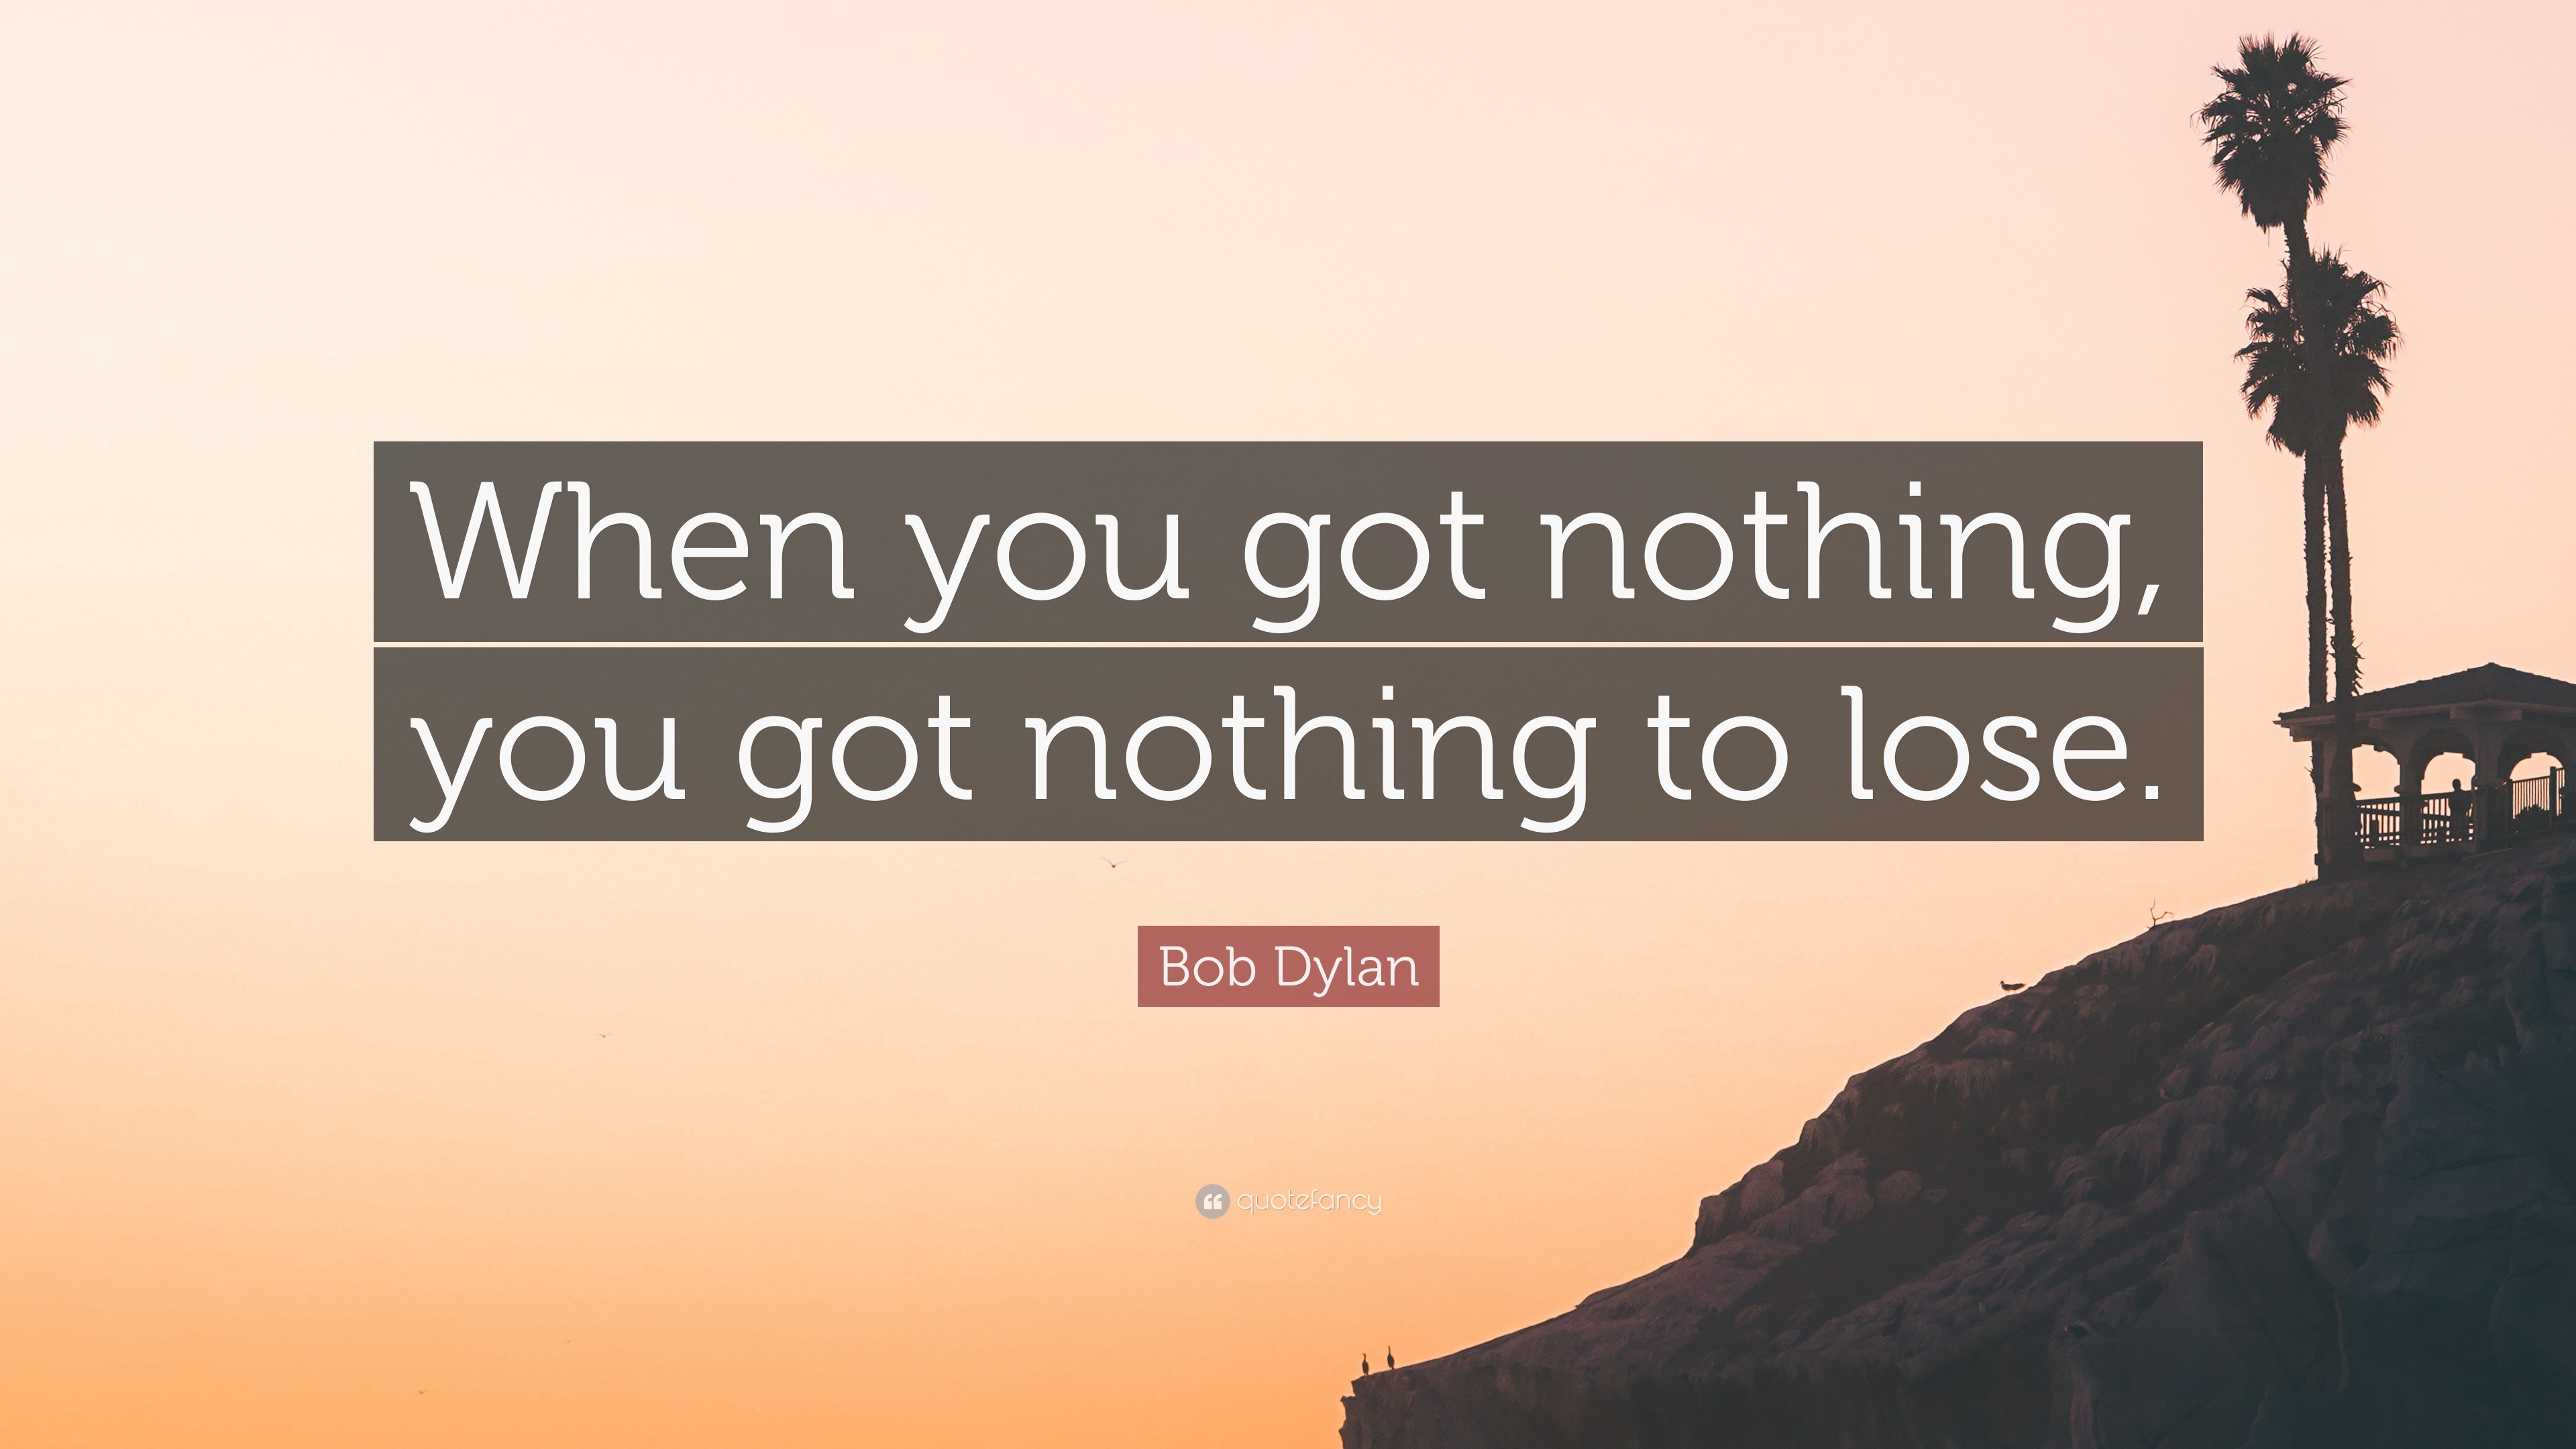 Bob Dylan Quote: “When you got nothing, you got nothing to lose.”